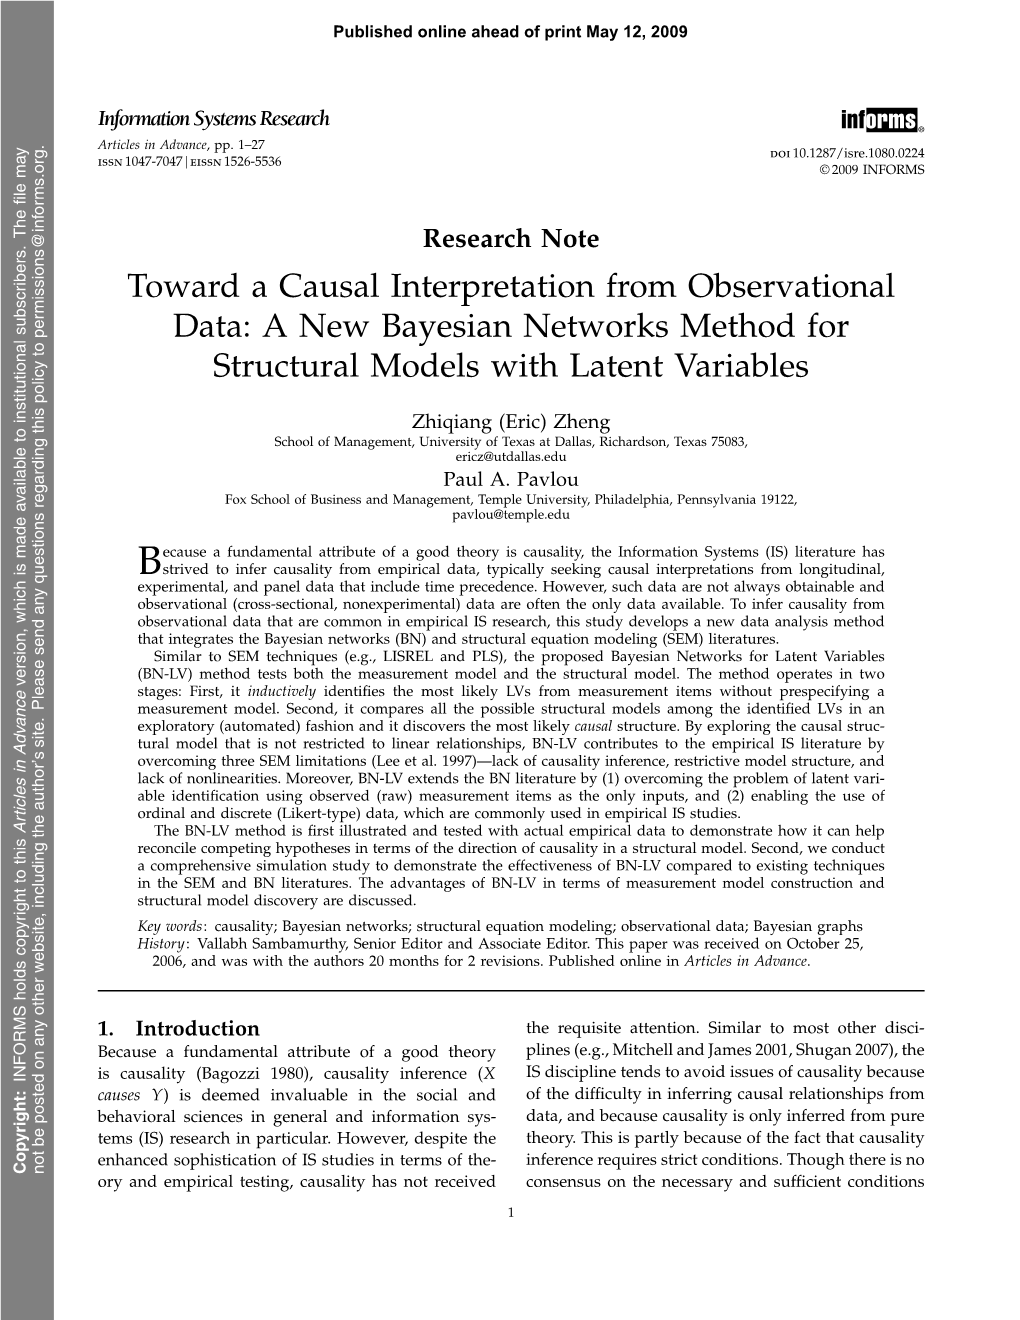 Toward a Causal Interpretation from Observational Data: a New Bayesian Networks Method for Structural Models with Latent Variabl